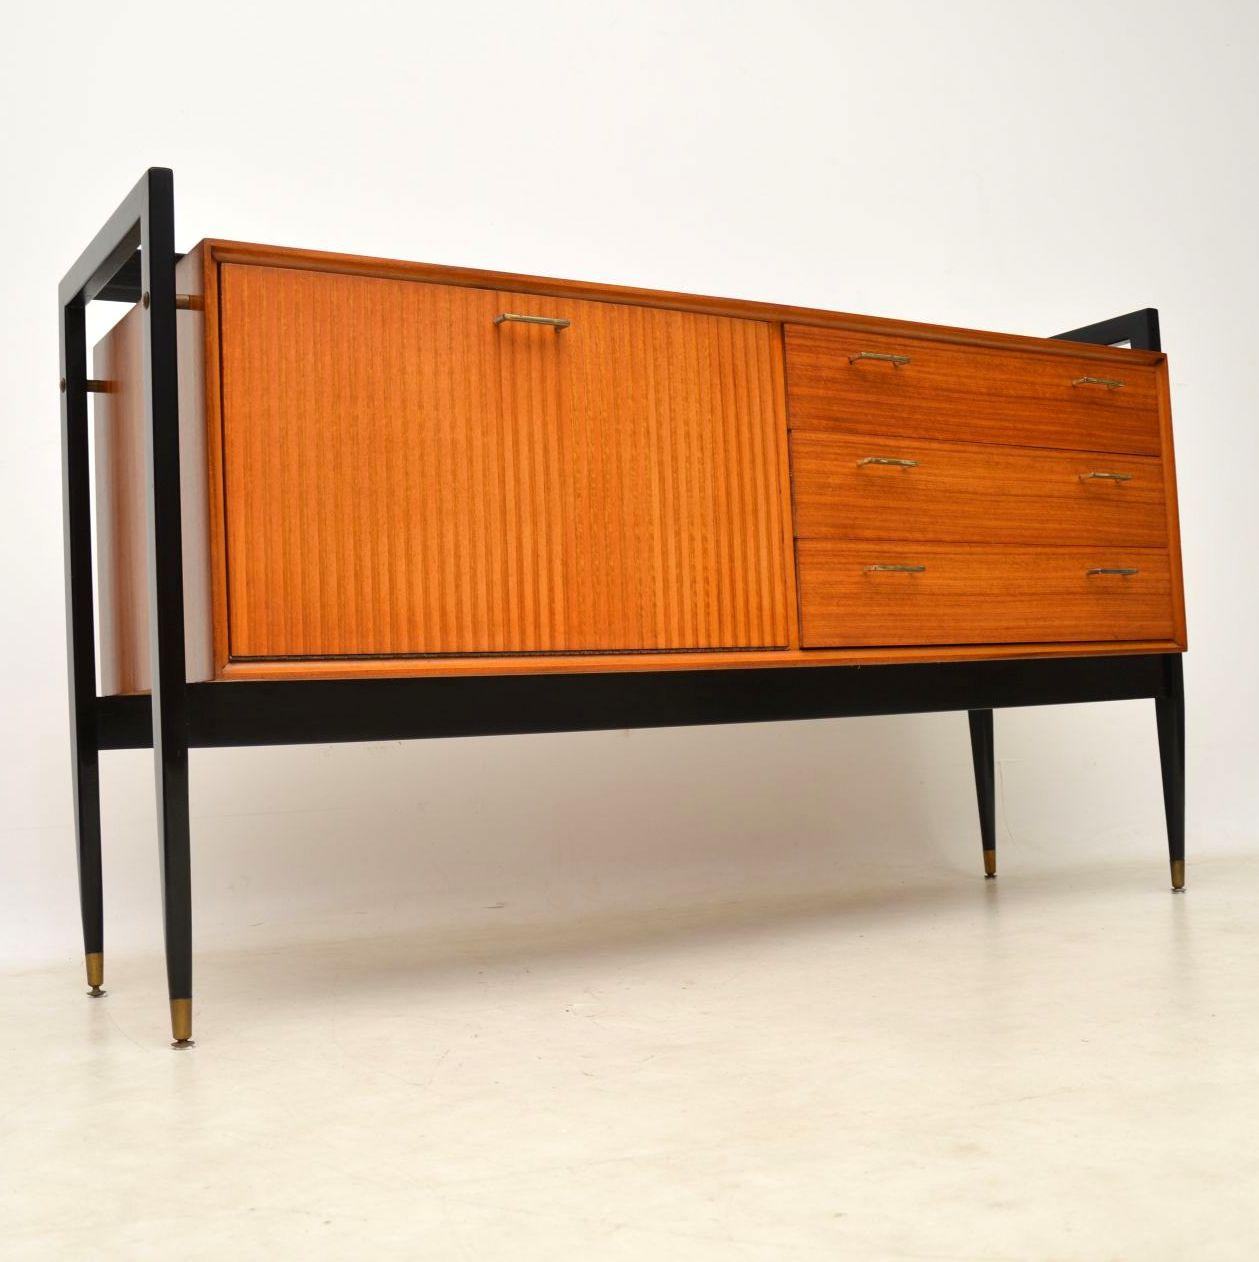 A stunning vintage sideboard, this dates from the 1950s-1960s. Its made from a light wood that looks like walnut, though it could be a light mahogany or tola wood. The legs are polished black with brass fixtures and this has brass handles as well.